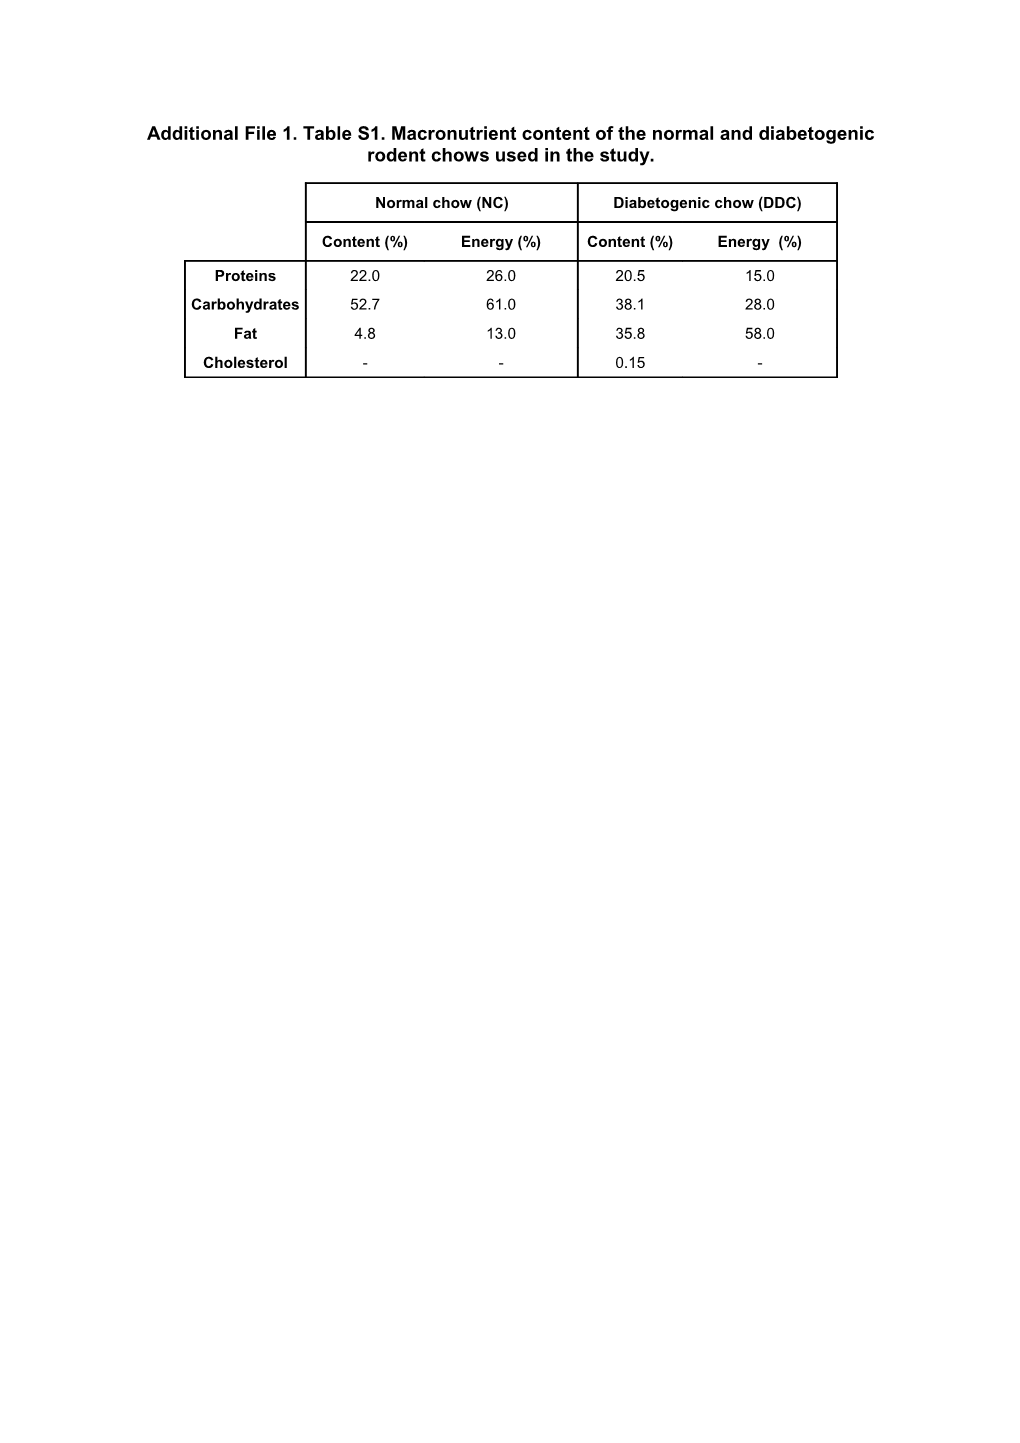 Additional File 1. Table S1.Macronutrient Content of the Normal and Diabetogenic Rodent